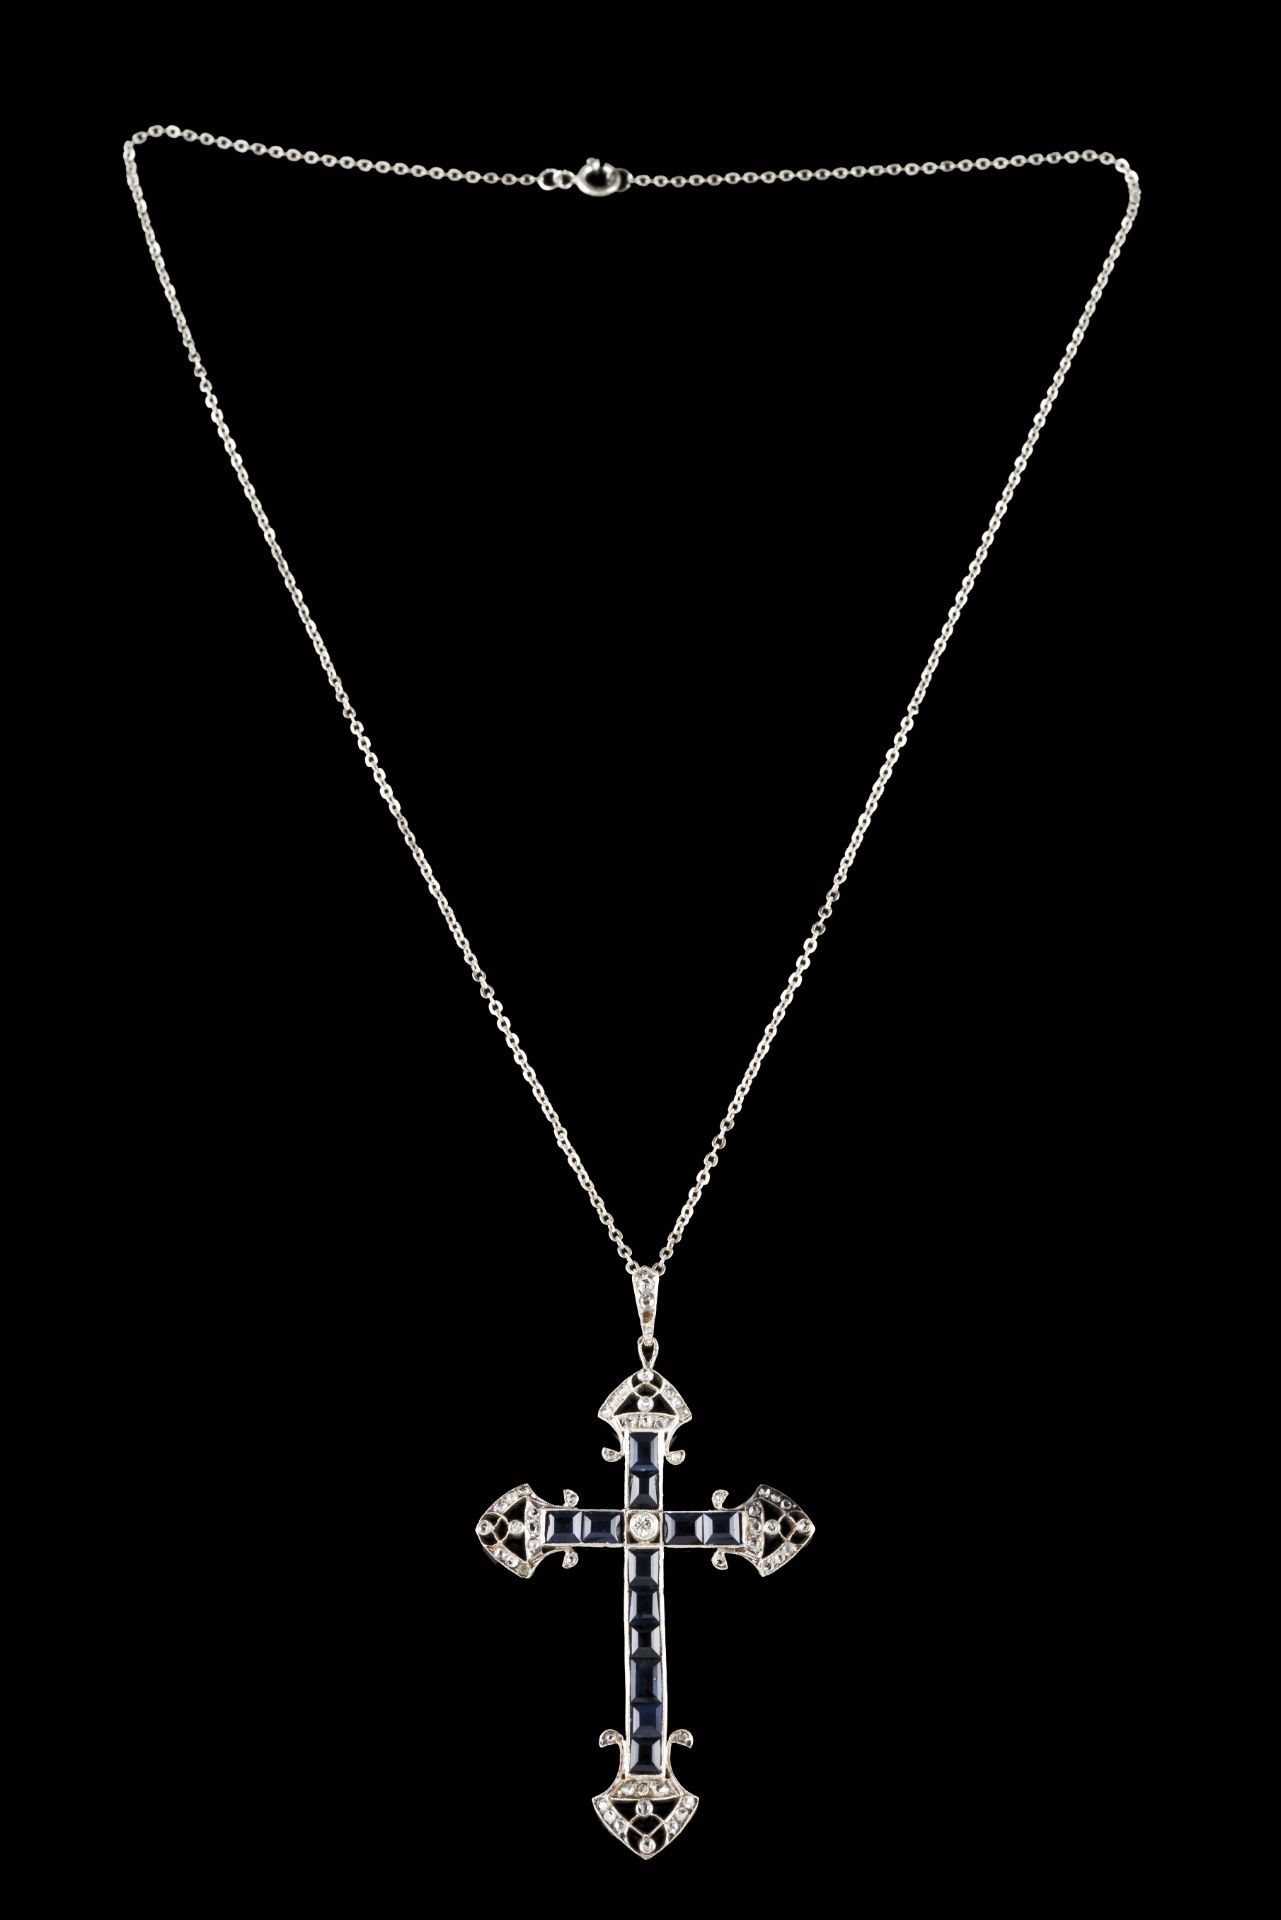 A chain with cross